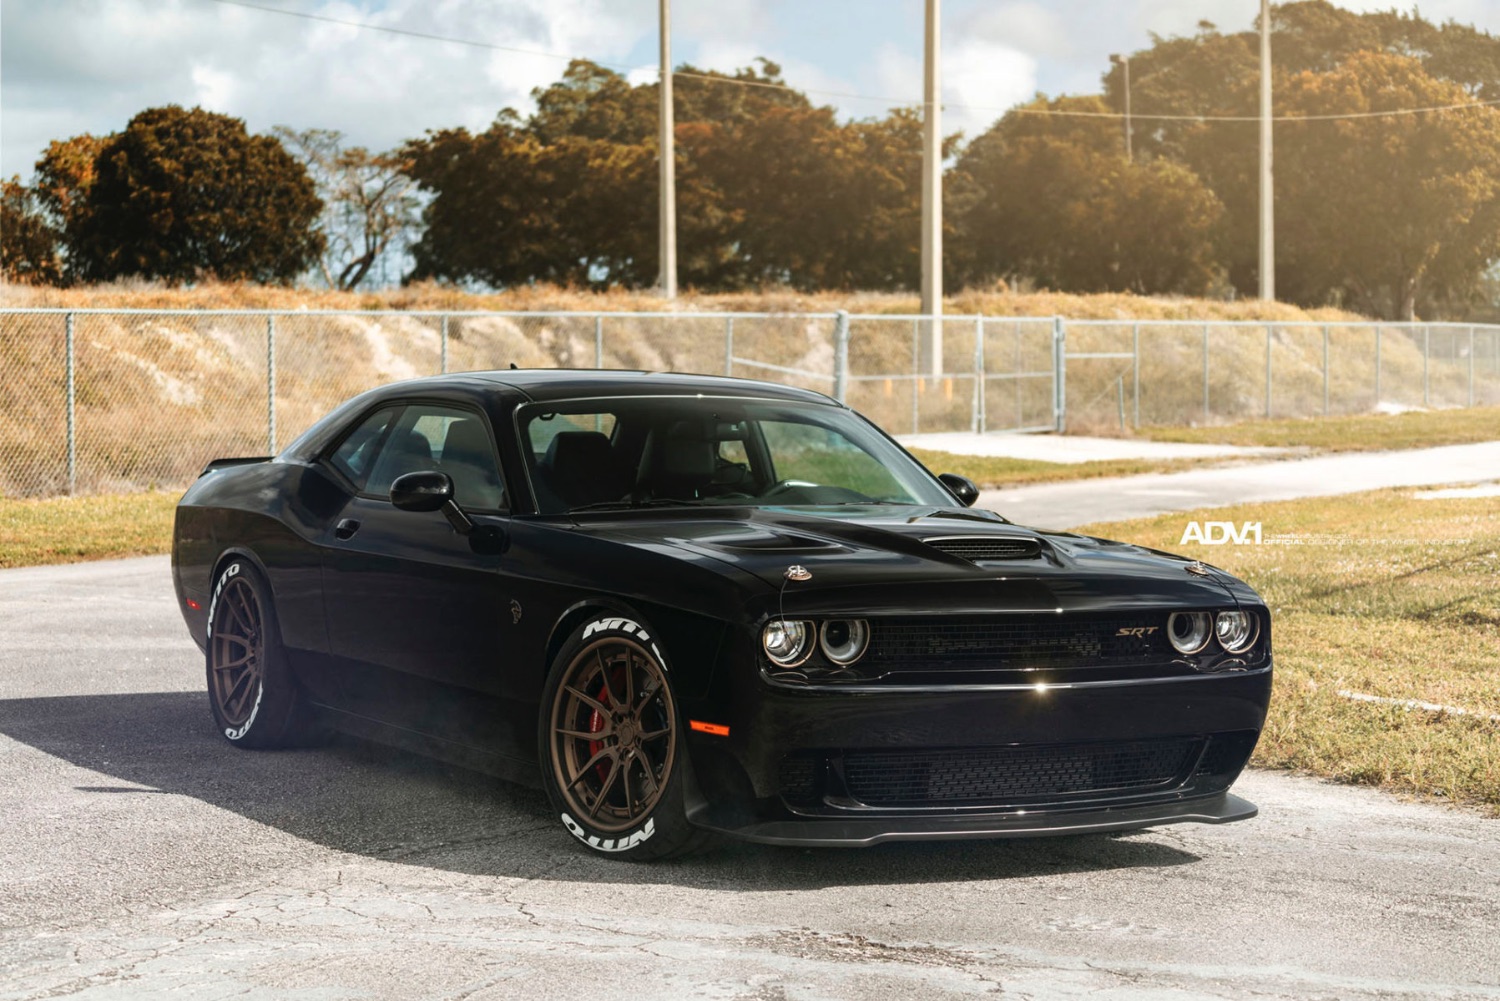 dodge-challenger-srt-hellcat-black-bronze-concave-adv1-wheels-lowered-modified-aftermarket-wallpaper-background-racing-rimsnitto-tire-letters-h